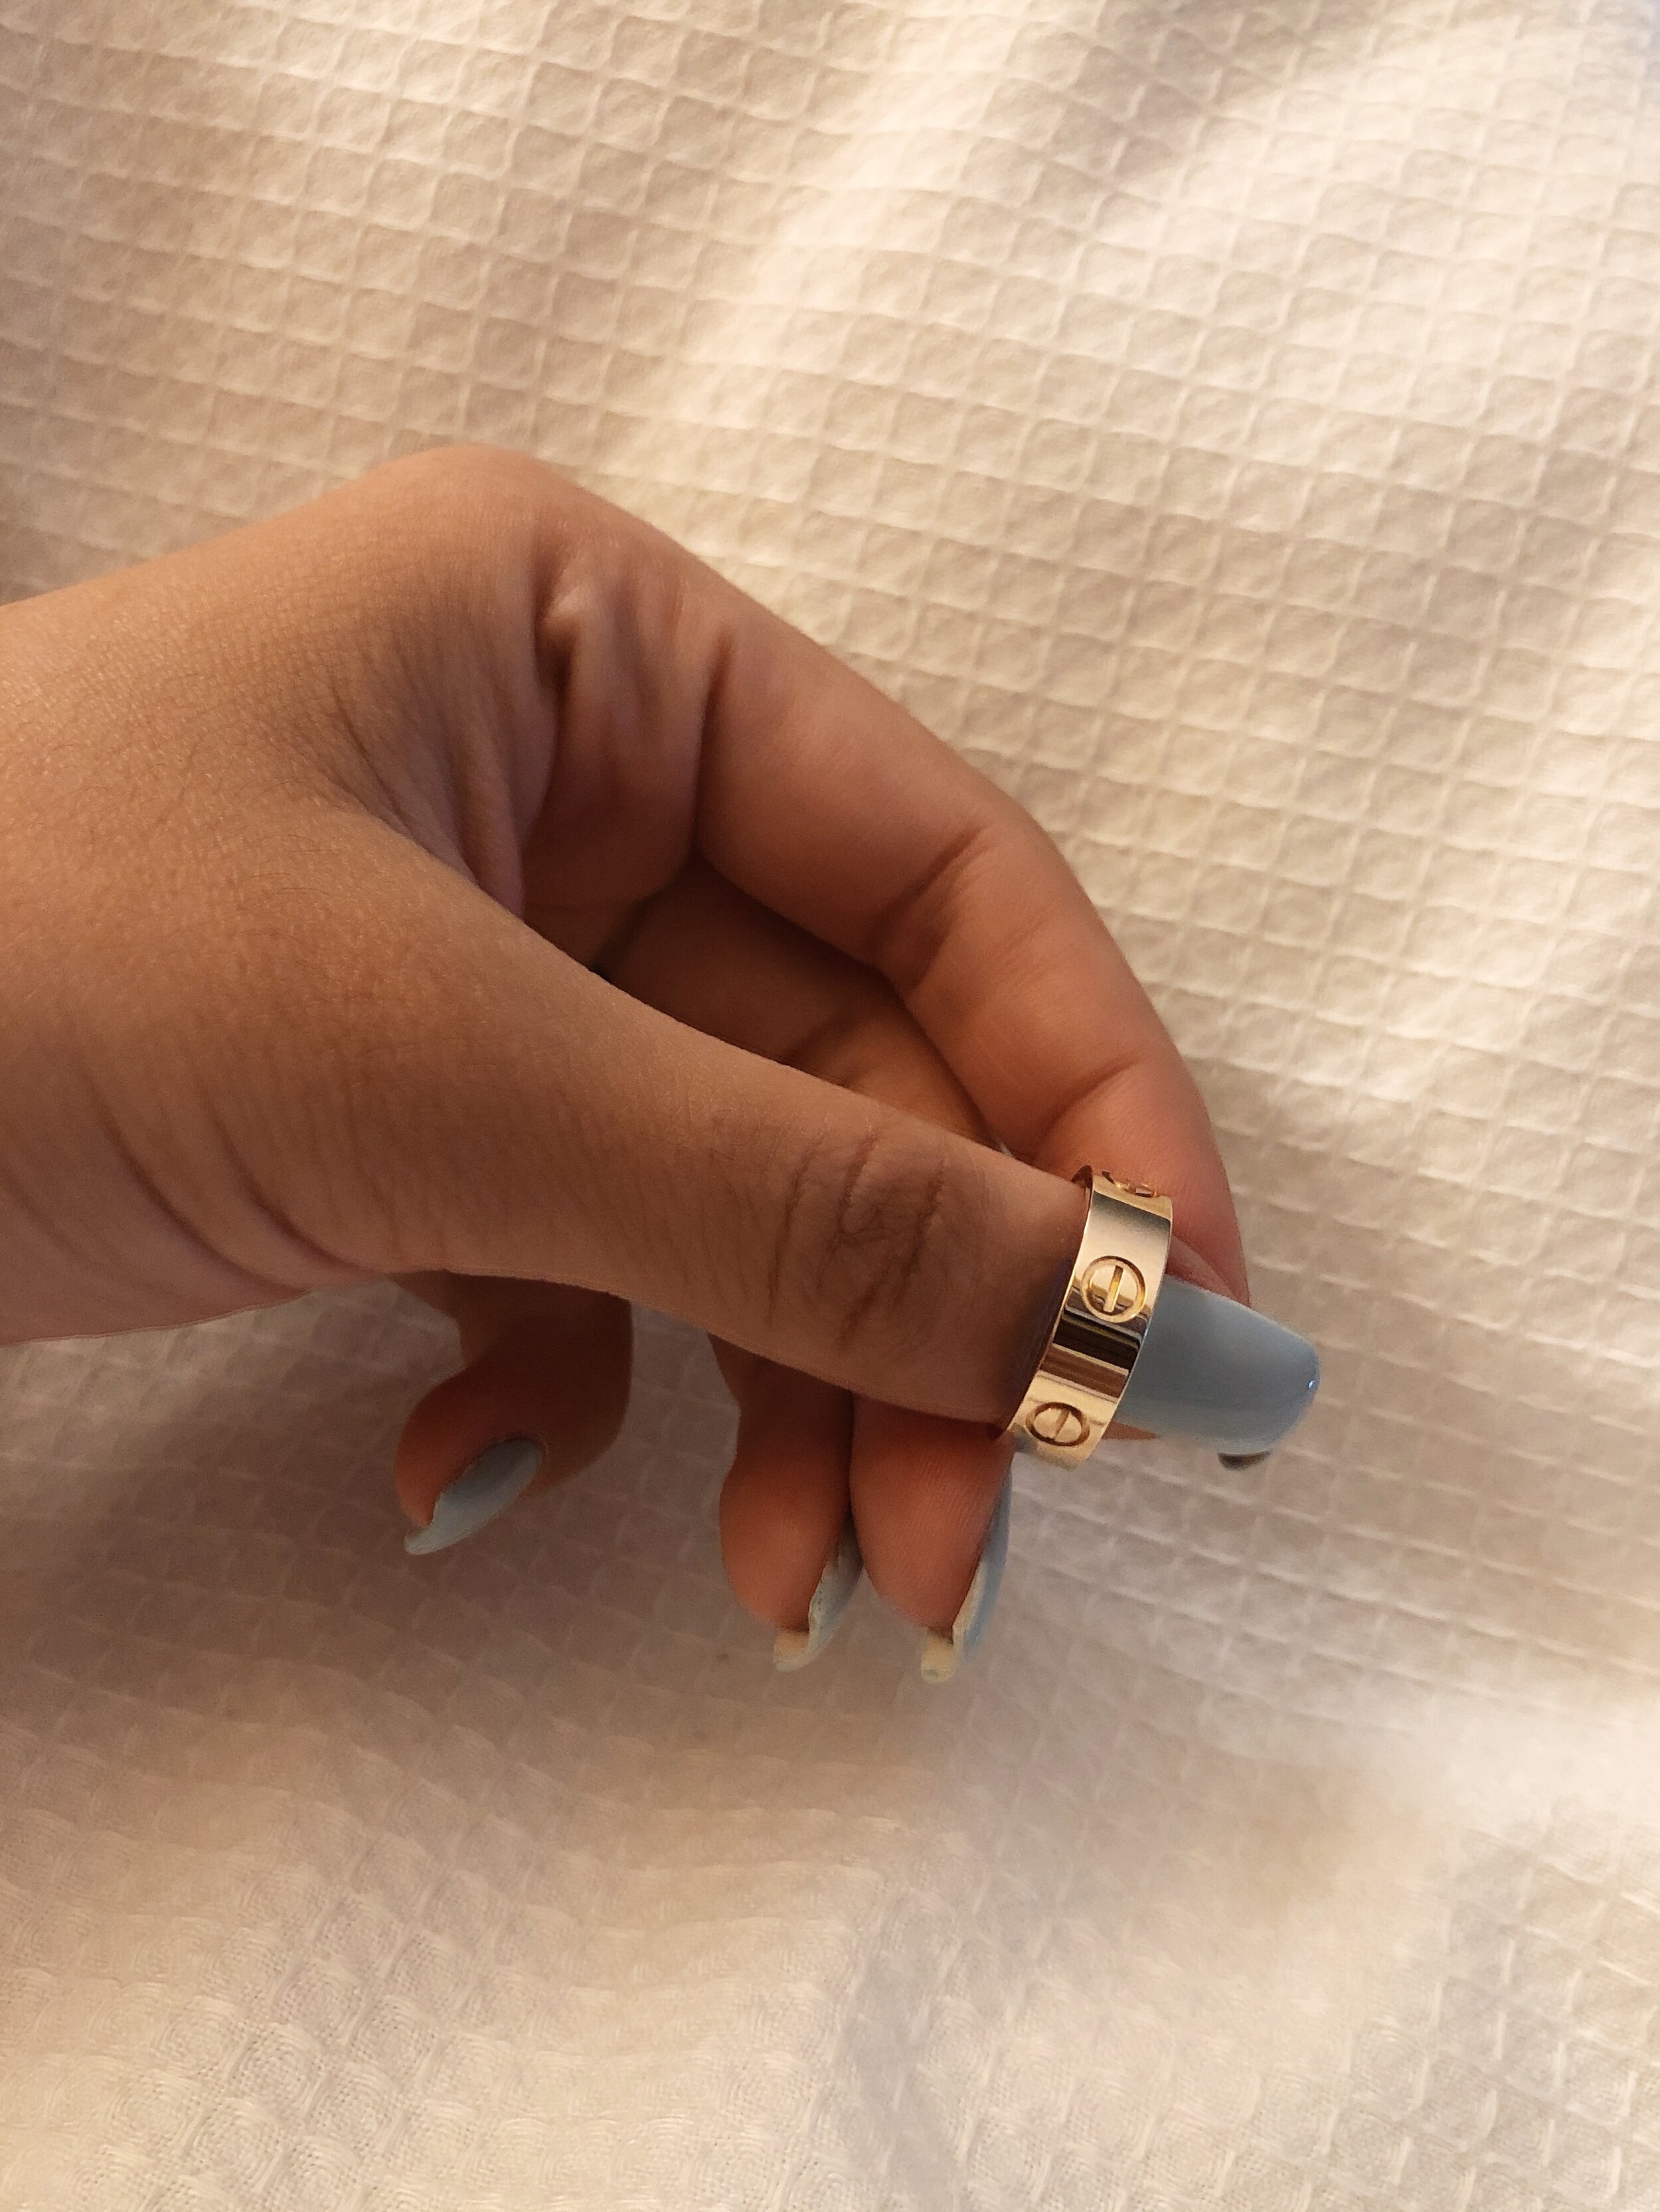 cartier love ring scratches easily